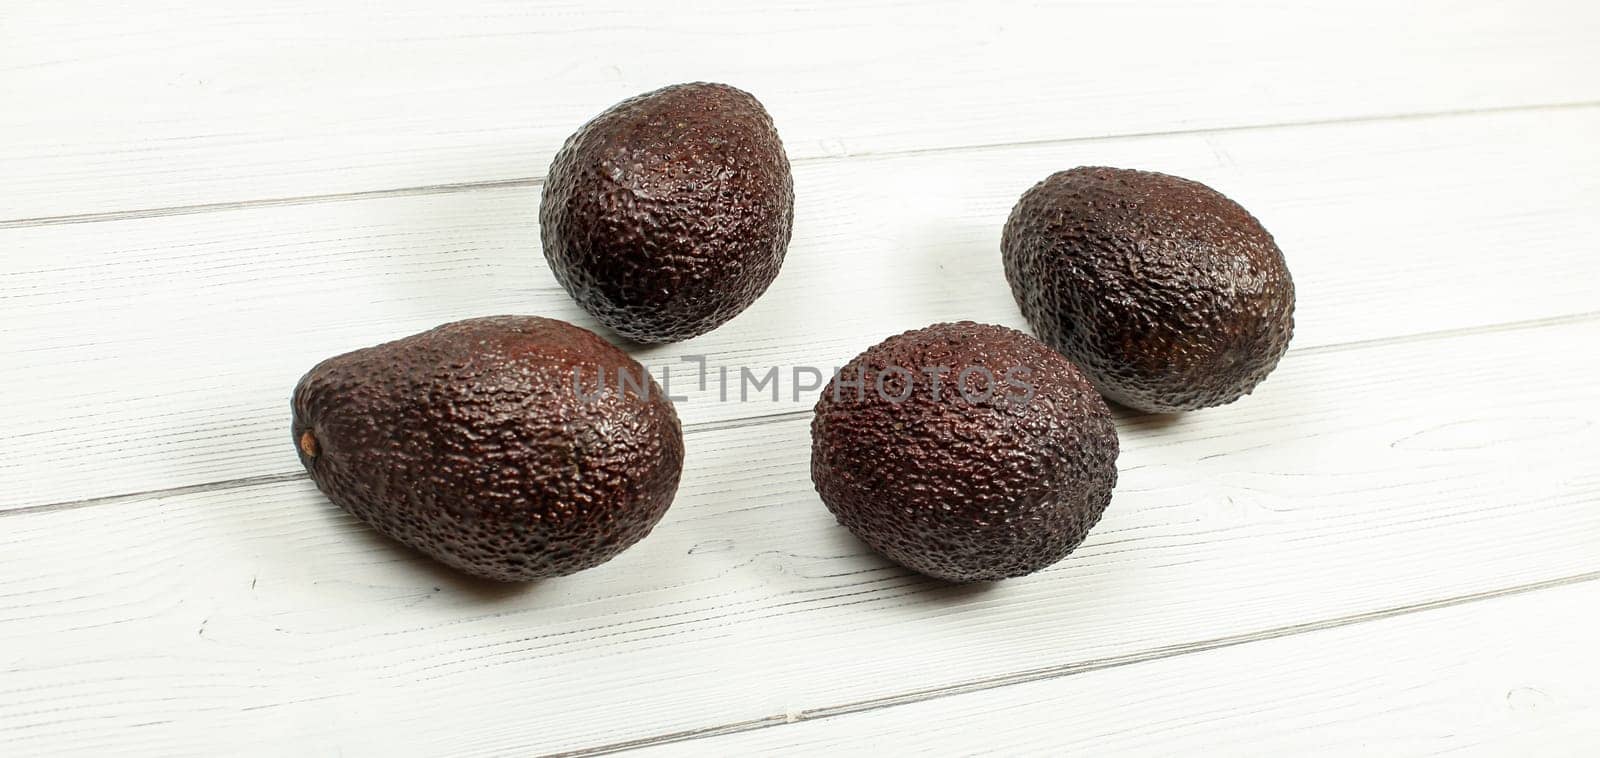 Four brown ripe avocados on white boards. by Ivanko